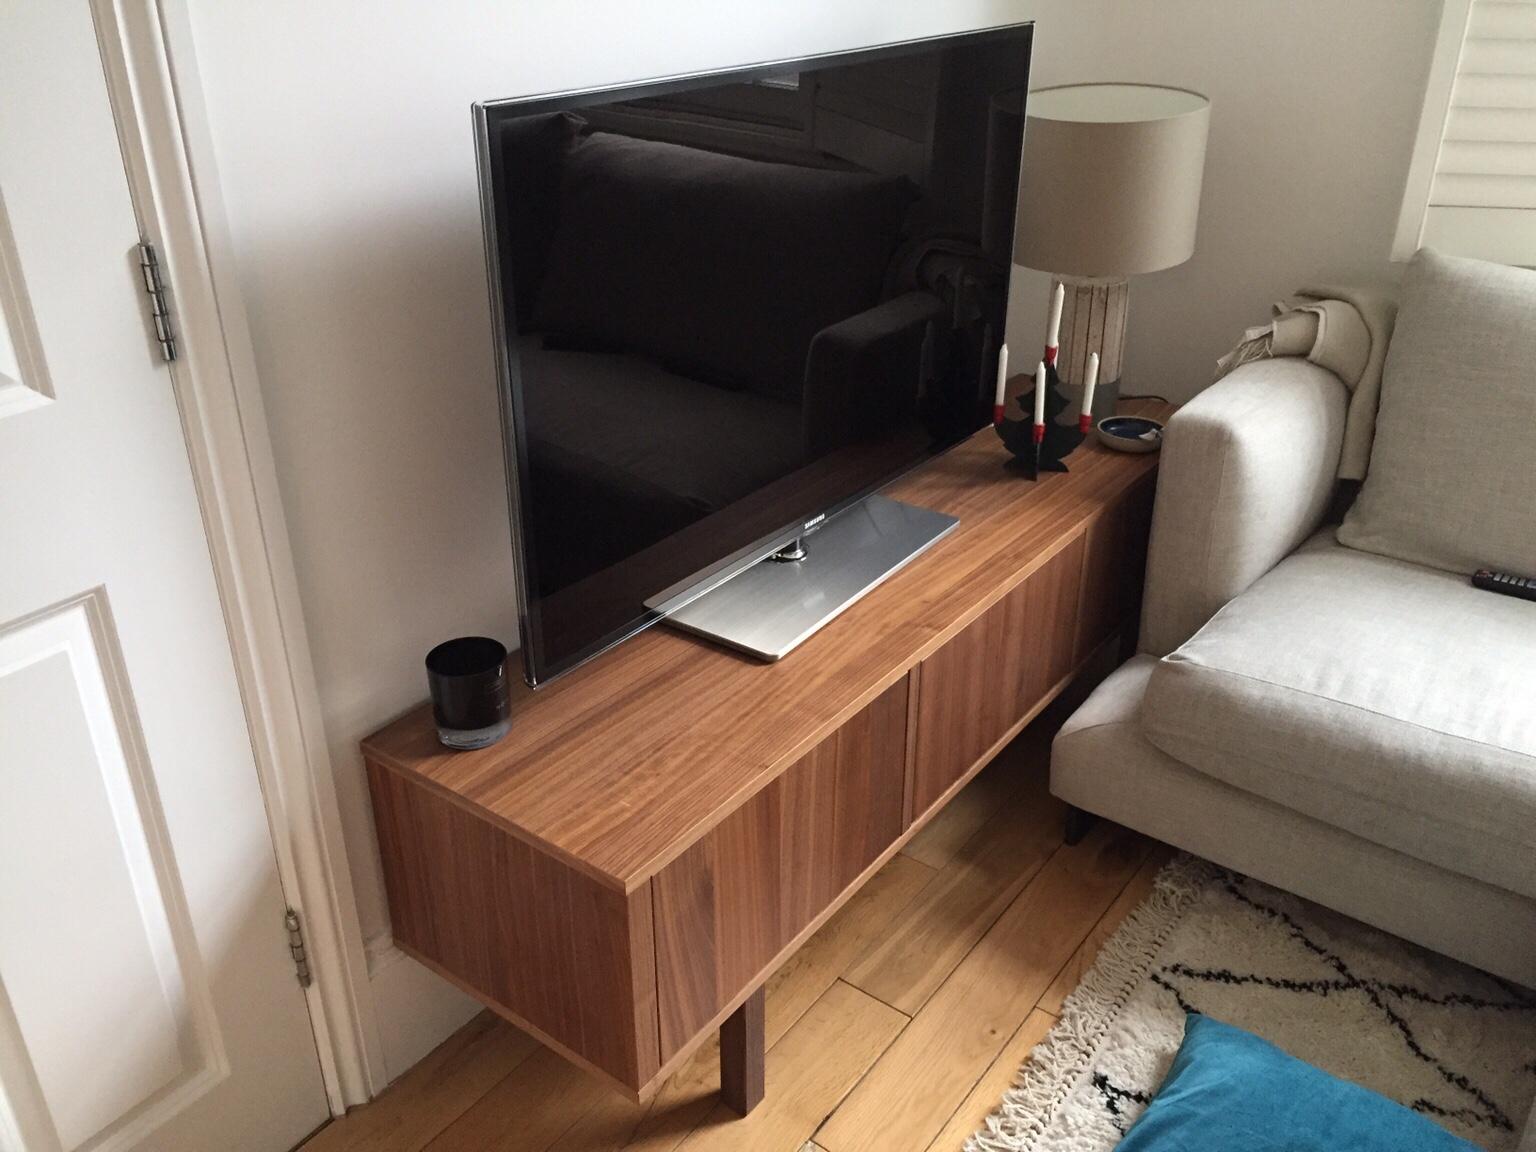 Ikea Stockholm Tv Bench Tv Stand Walnut In Nw1 London For